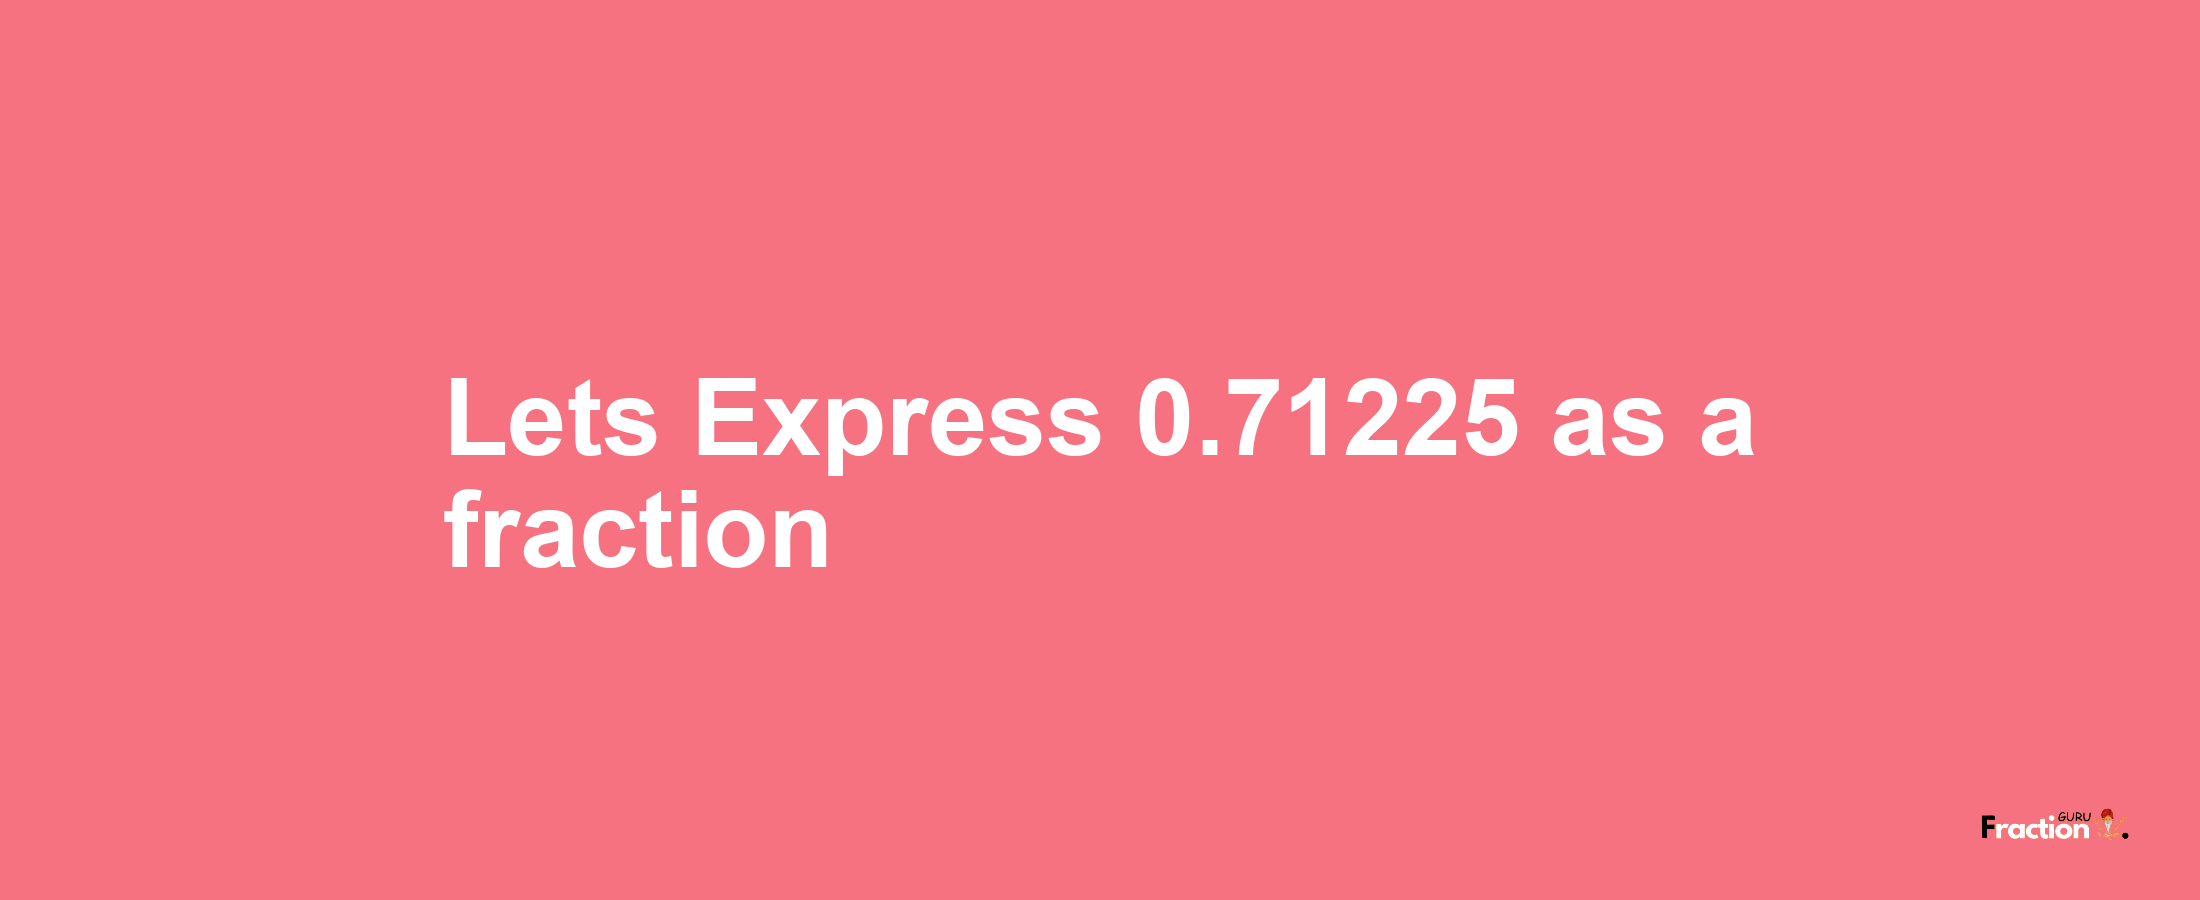 Lets Express 0.71225 as afraction